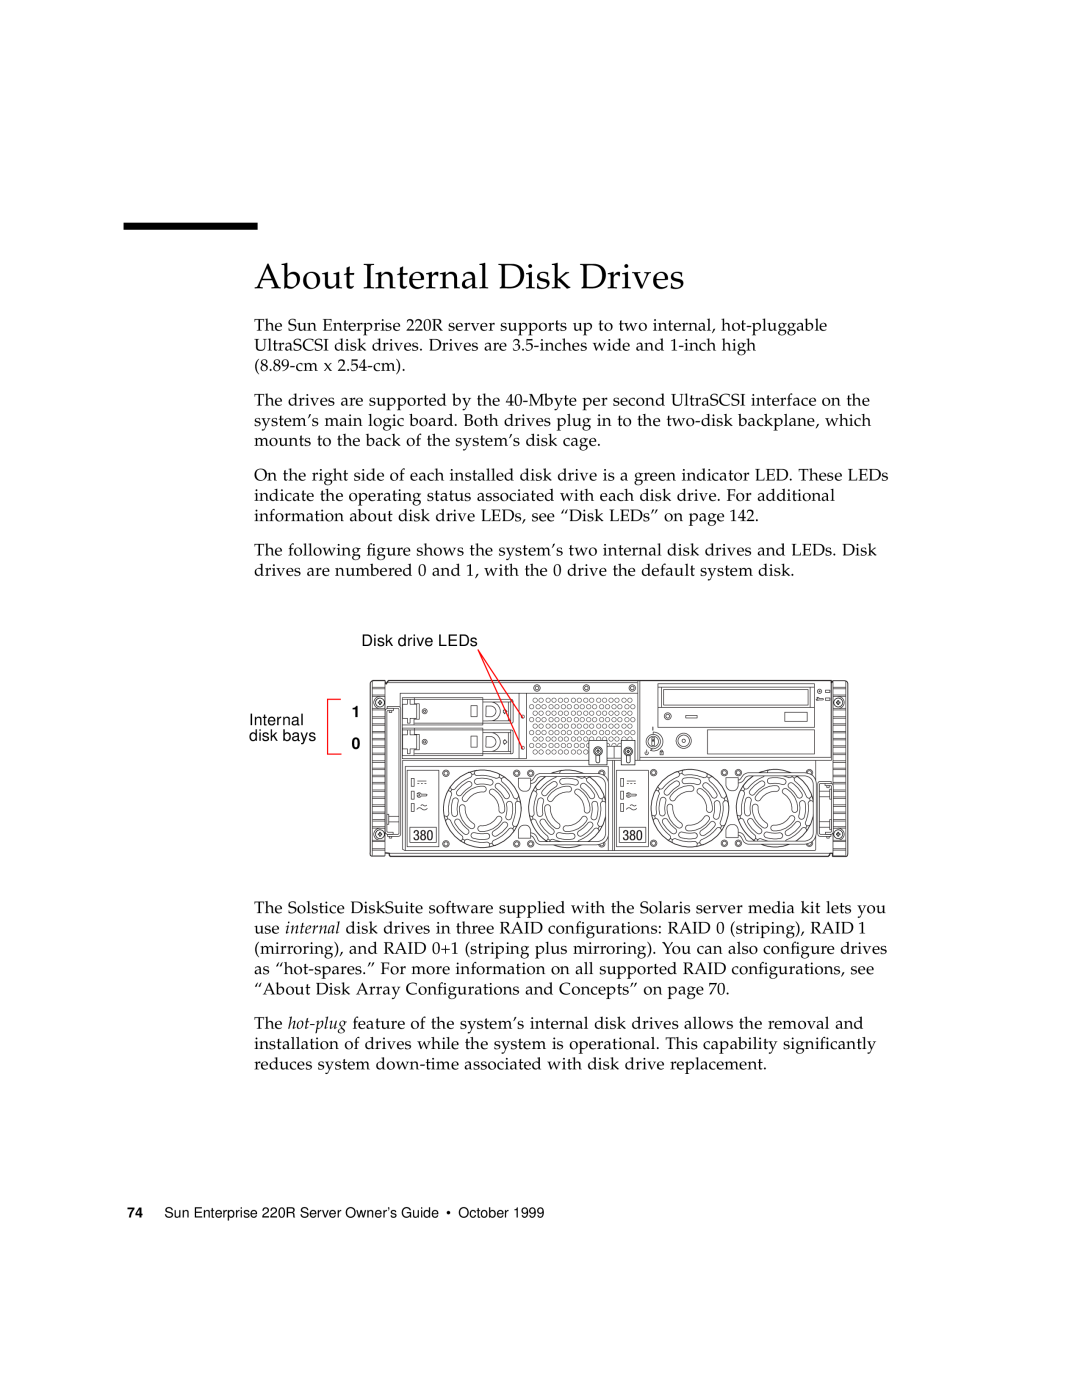 Sun Microsystems 220R manual About Internal Disk Drives, Disk drive LEDs, disk bays 